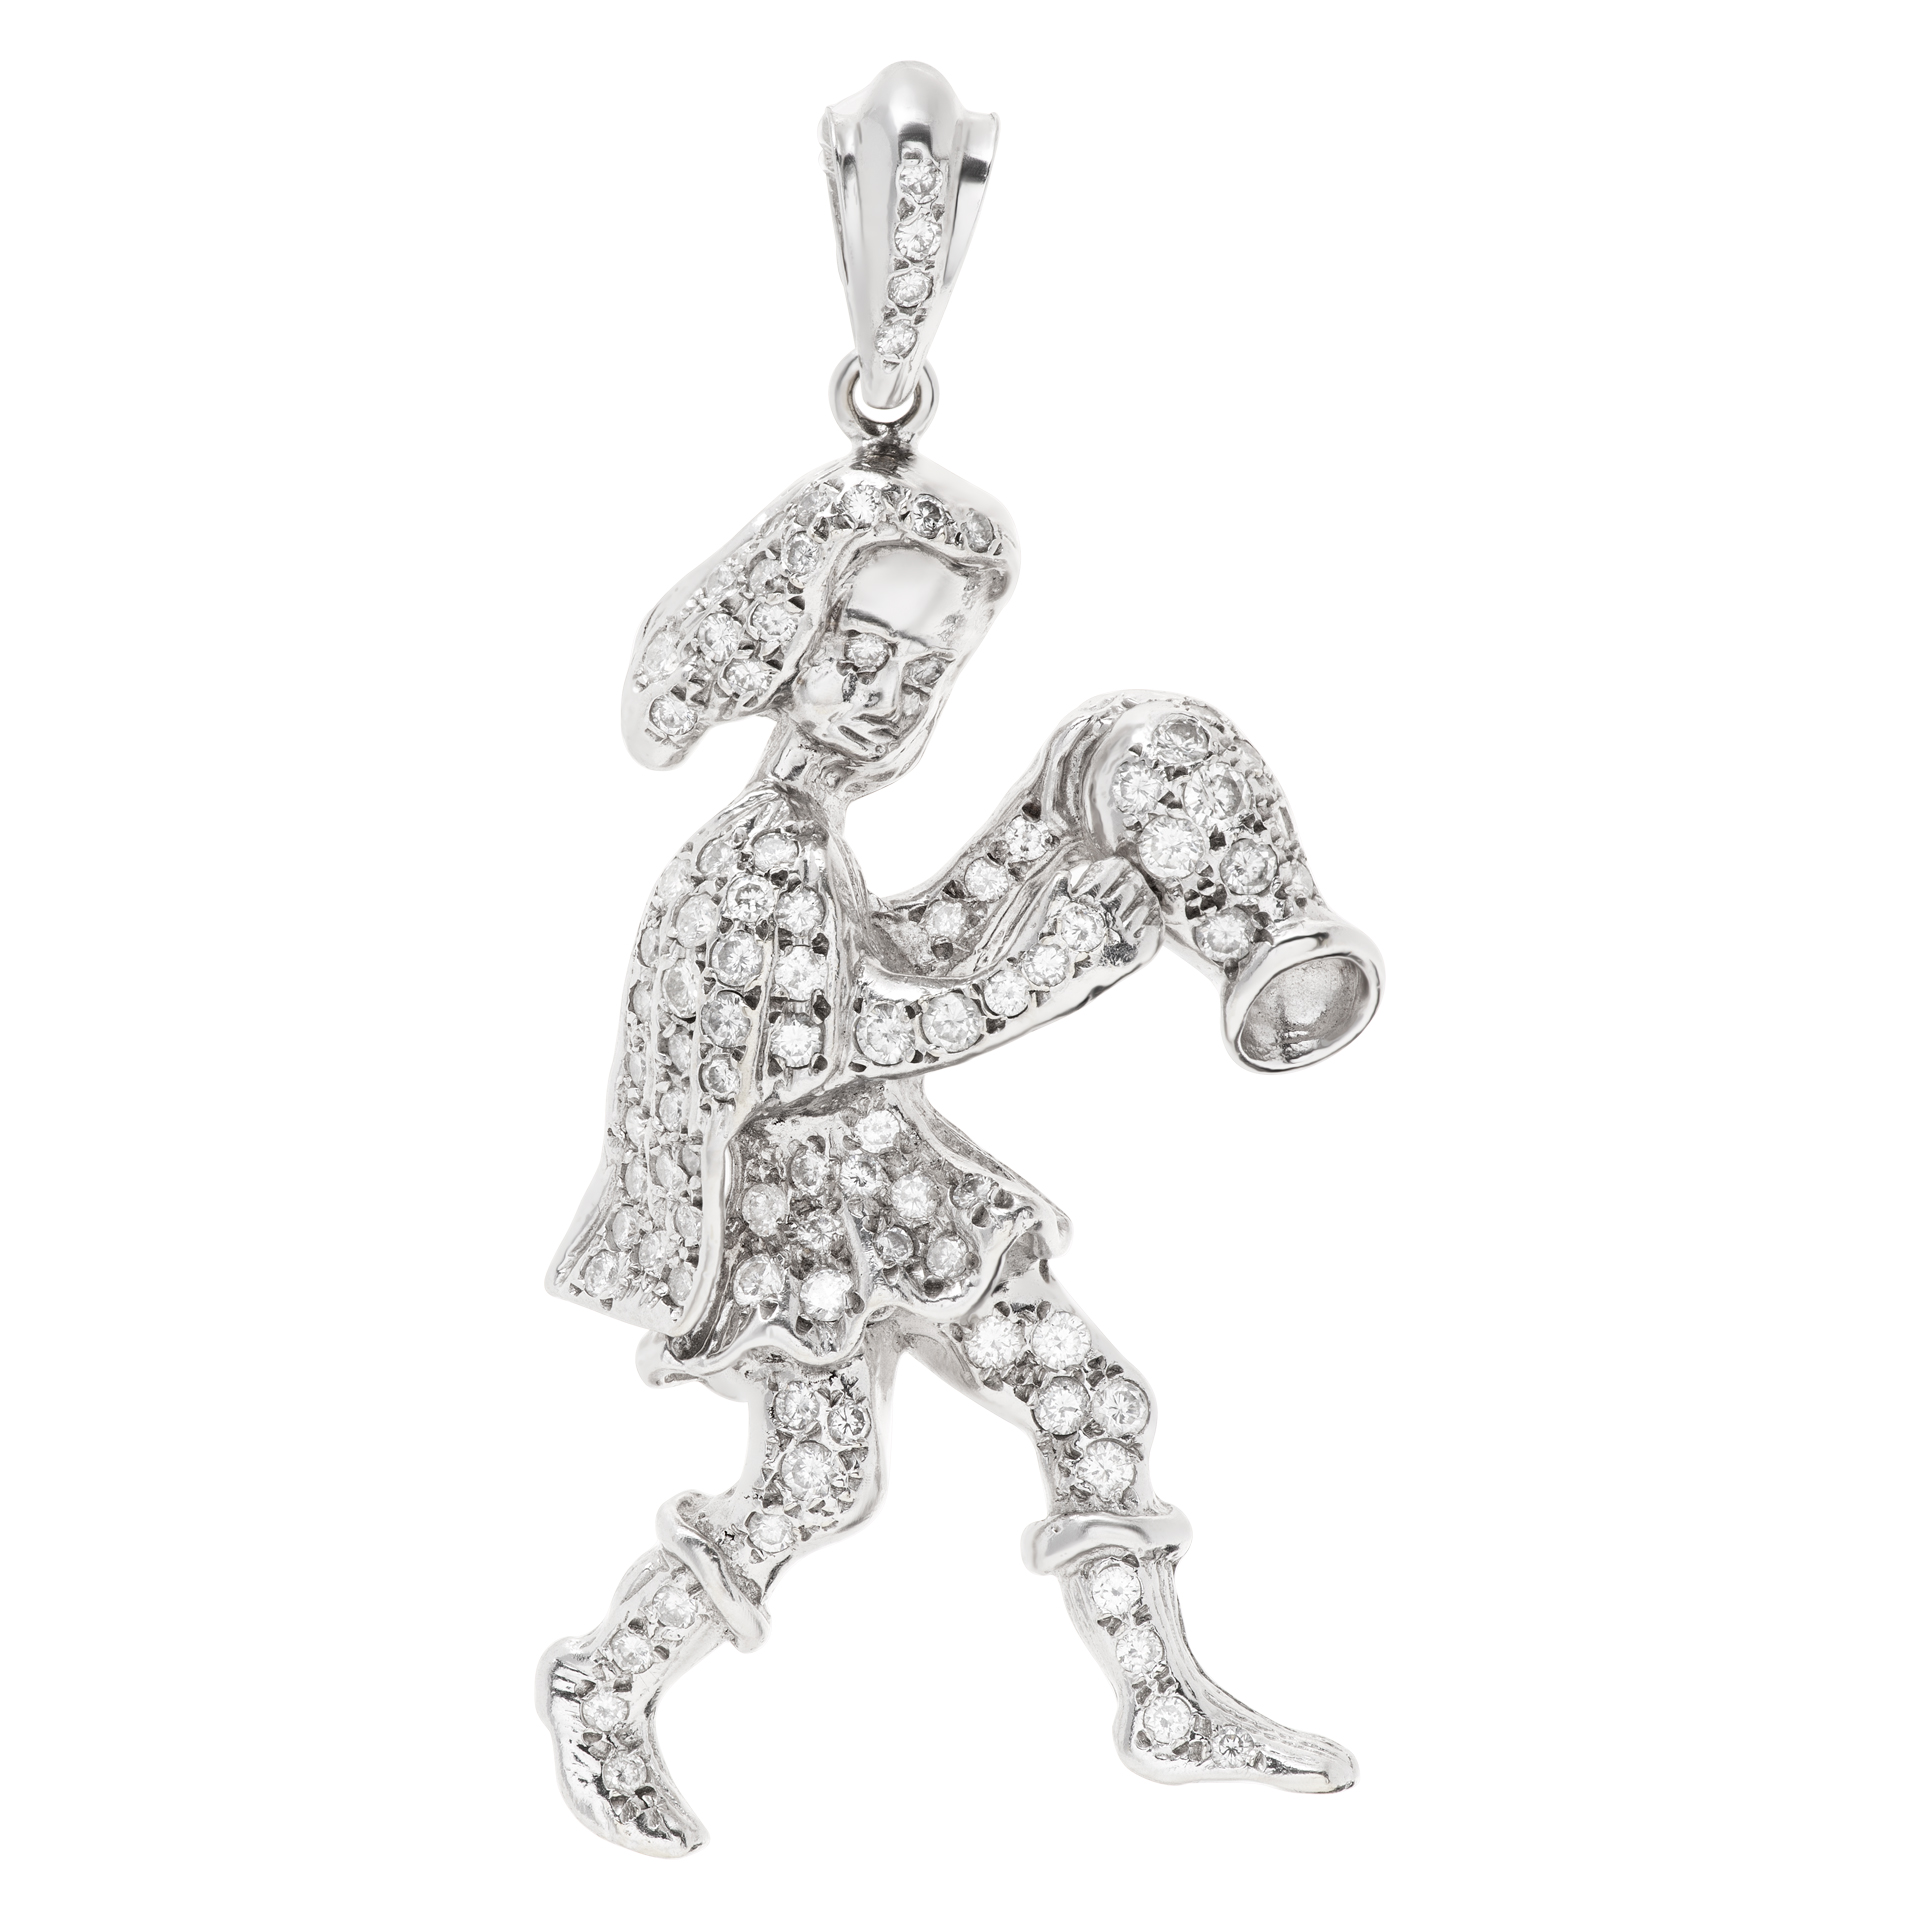 Zodiac Diamonds pendant Aquarius or the Water Bearer, in 14K white gold. Round brilliant cut diamonds total approx. weight: over 4.50 carats